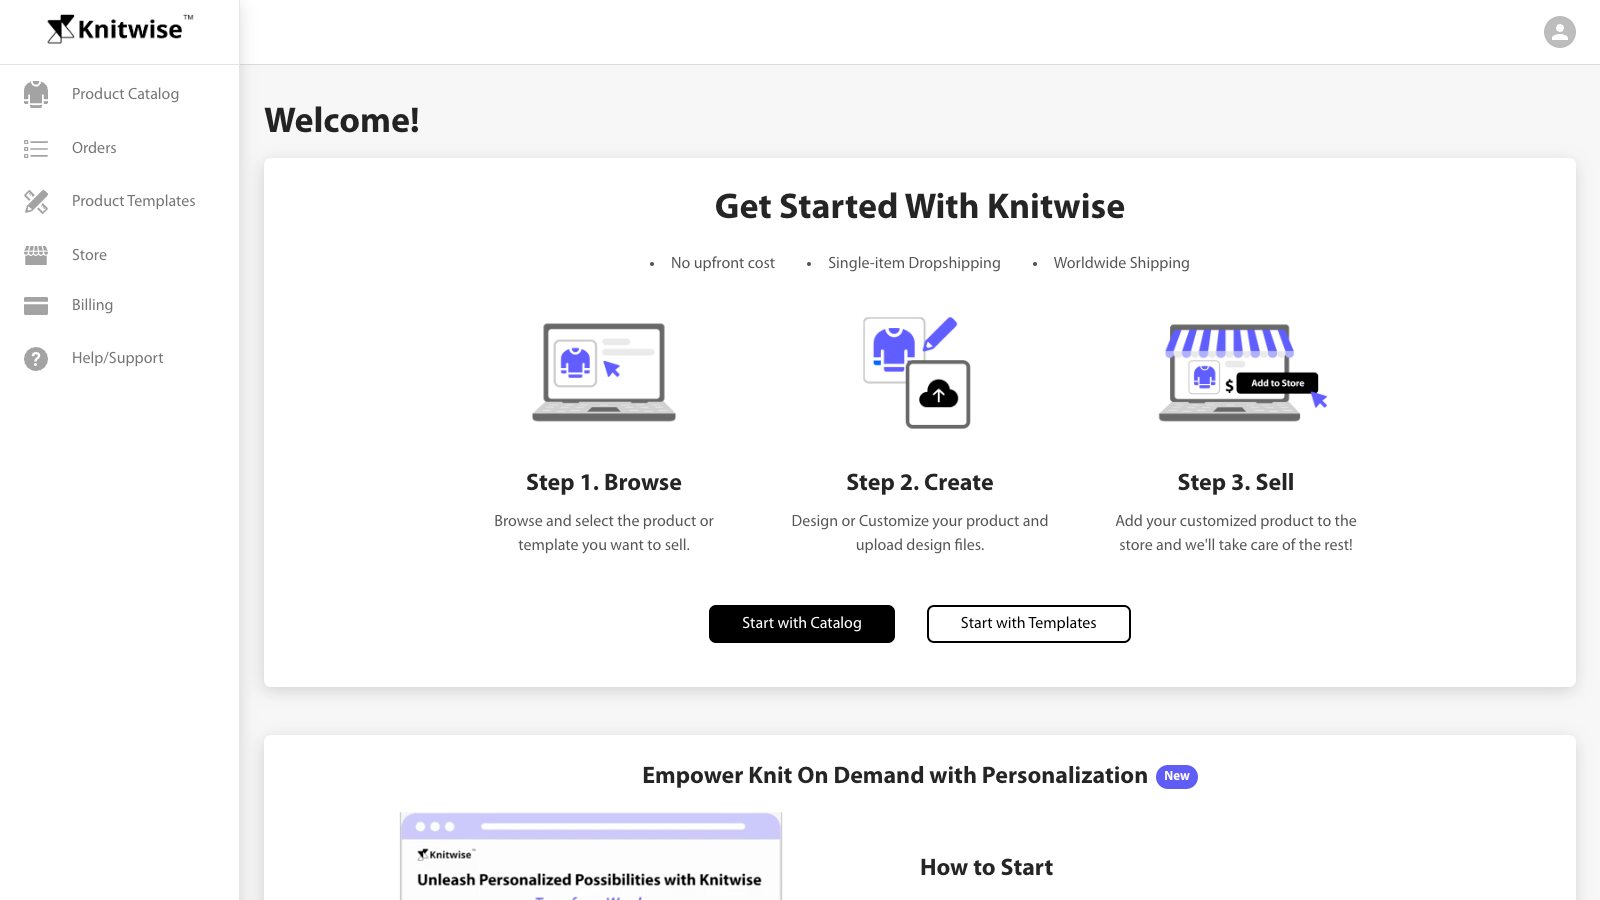 Home section-how to start custom knitwear with Knit On Demand